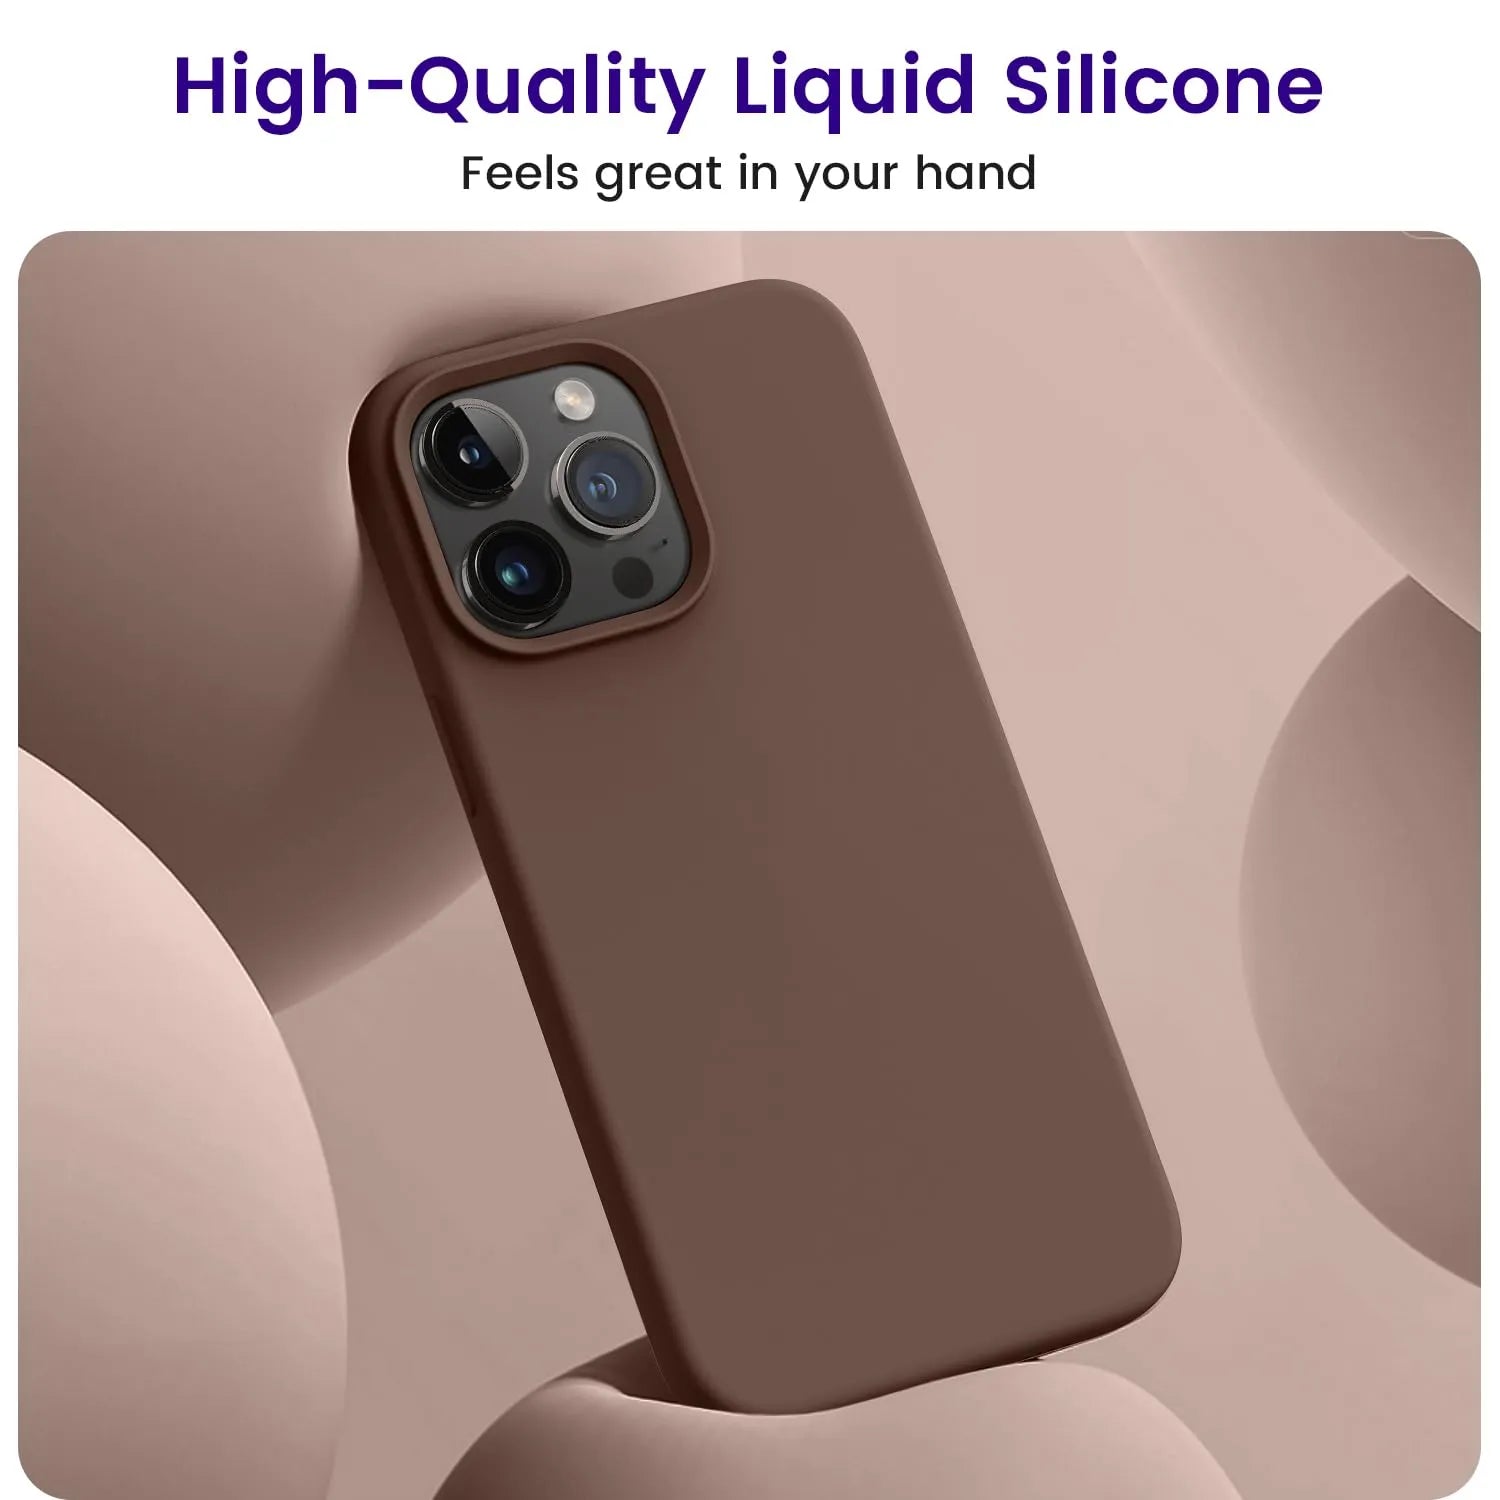 The Best Apple iPhone 15 Pro Max Silicone Case - OTOFLY